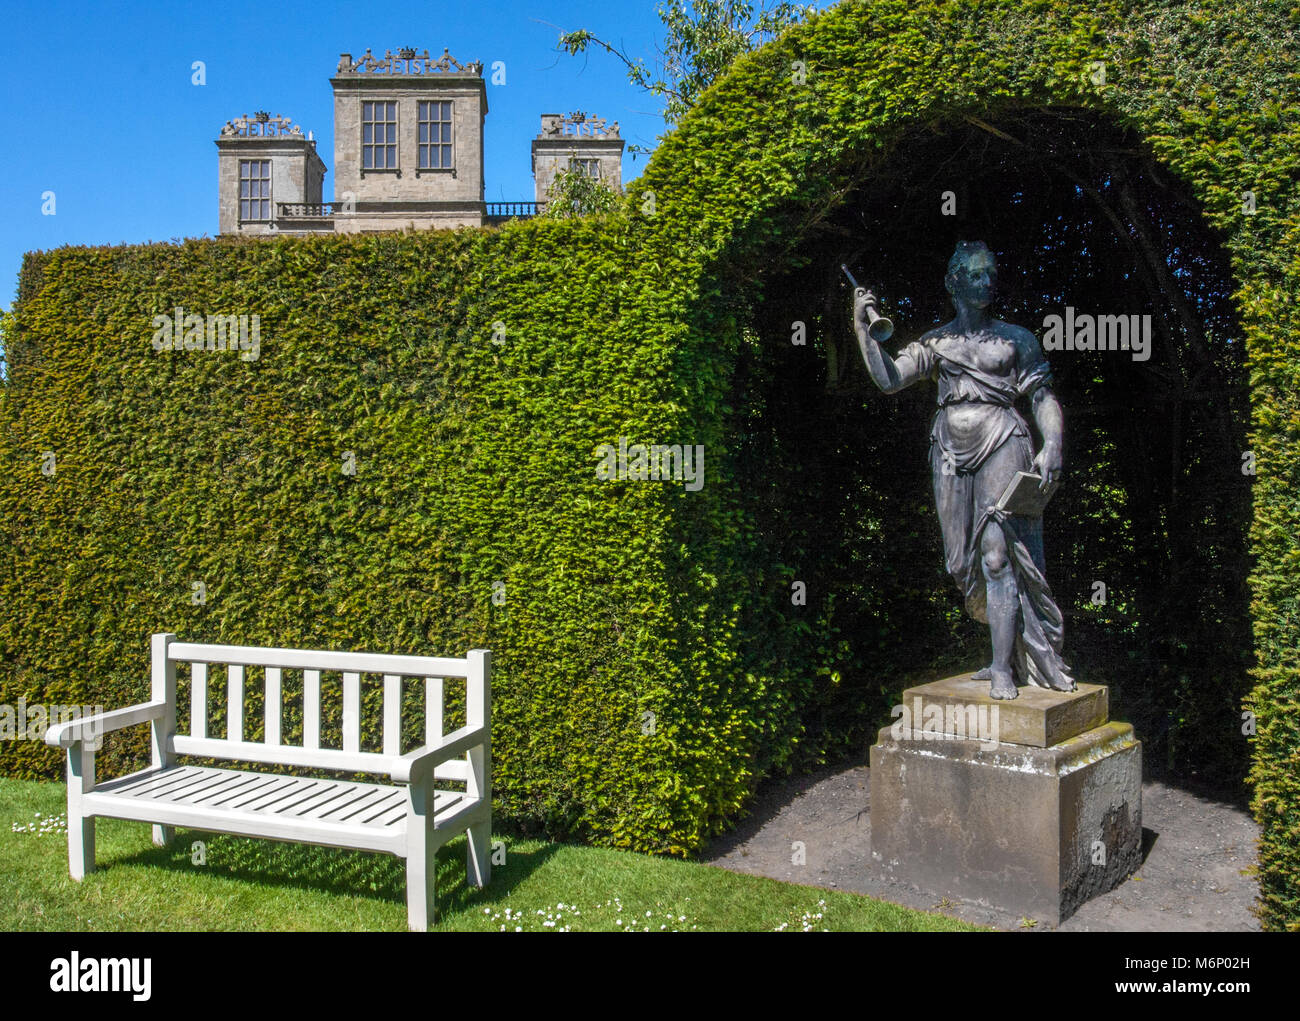 One of the four muse sculptures in an arched niche formed by a neatly clipped yew hedge in the gardens of Hardwick Hall in Derbyshire UK Stock Photo